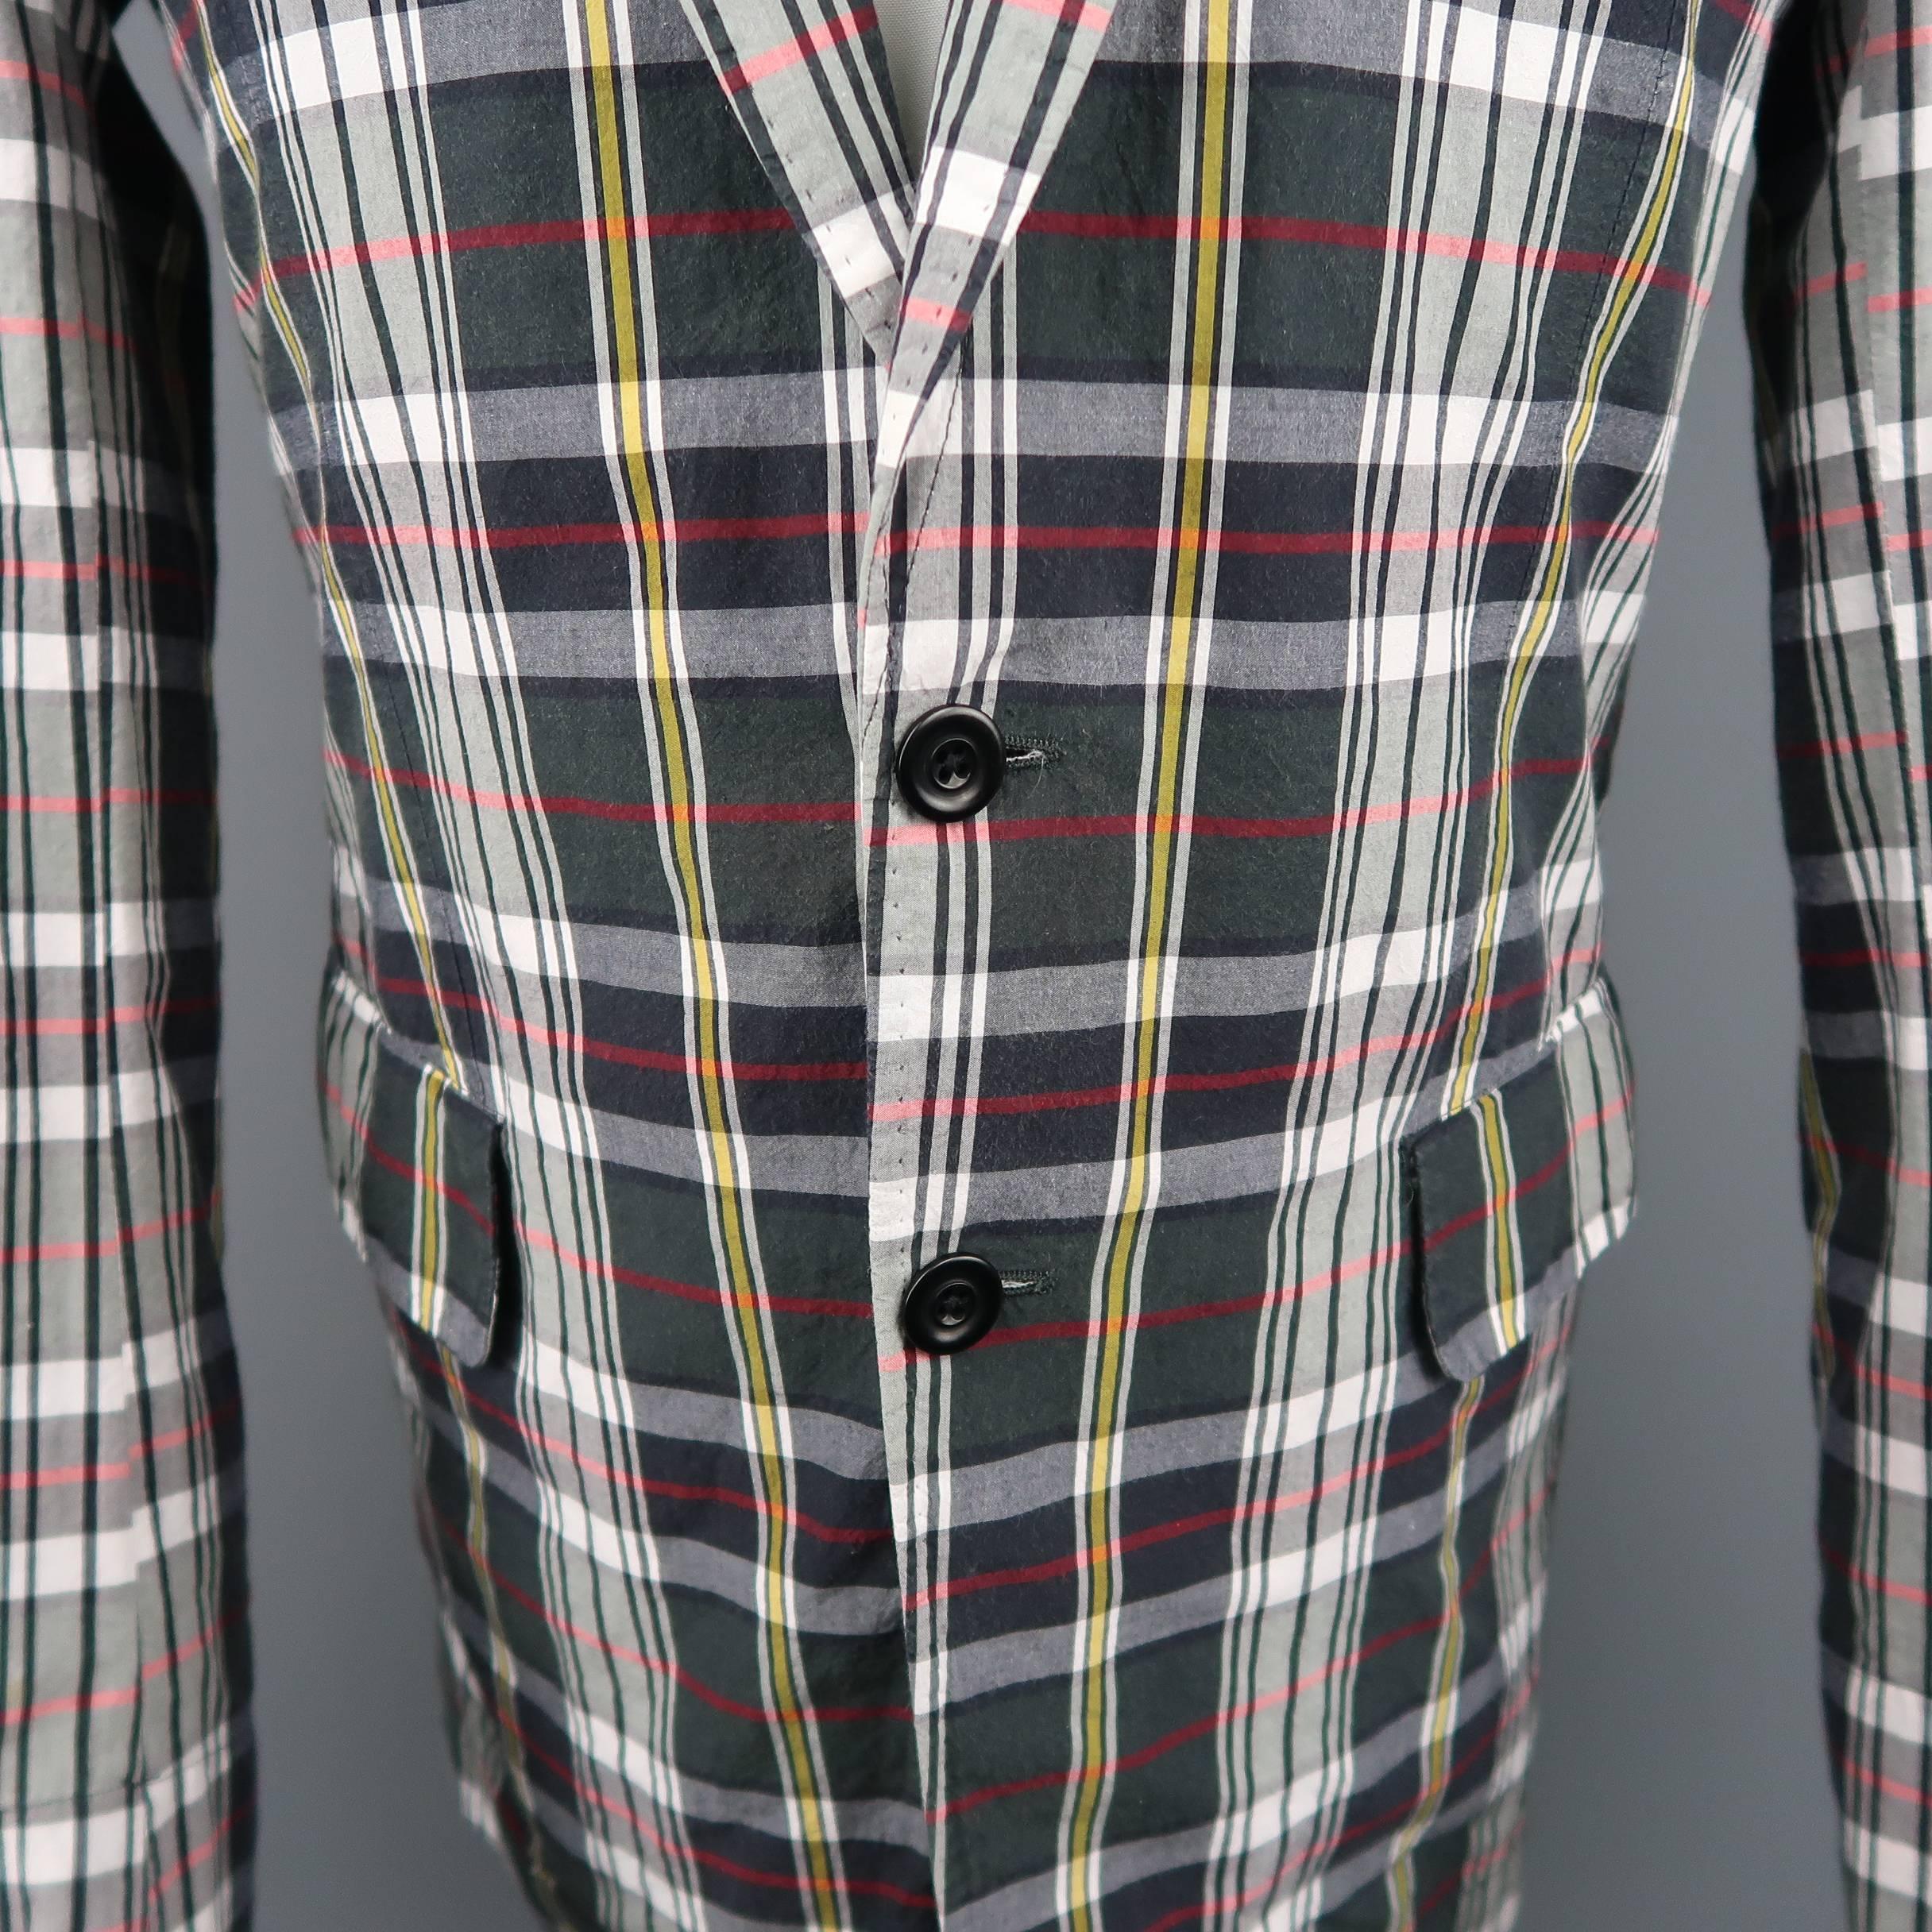 Single breasted DRIES VAN NOTEN sport coat comes in a washed effect charcoal and white plaid textured cotton with yellow and red details with a notch lapel, two button front, and top stitch details throughout. Made in Slovenia.
 
Good Pre-Owned